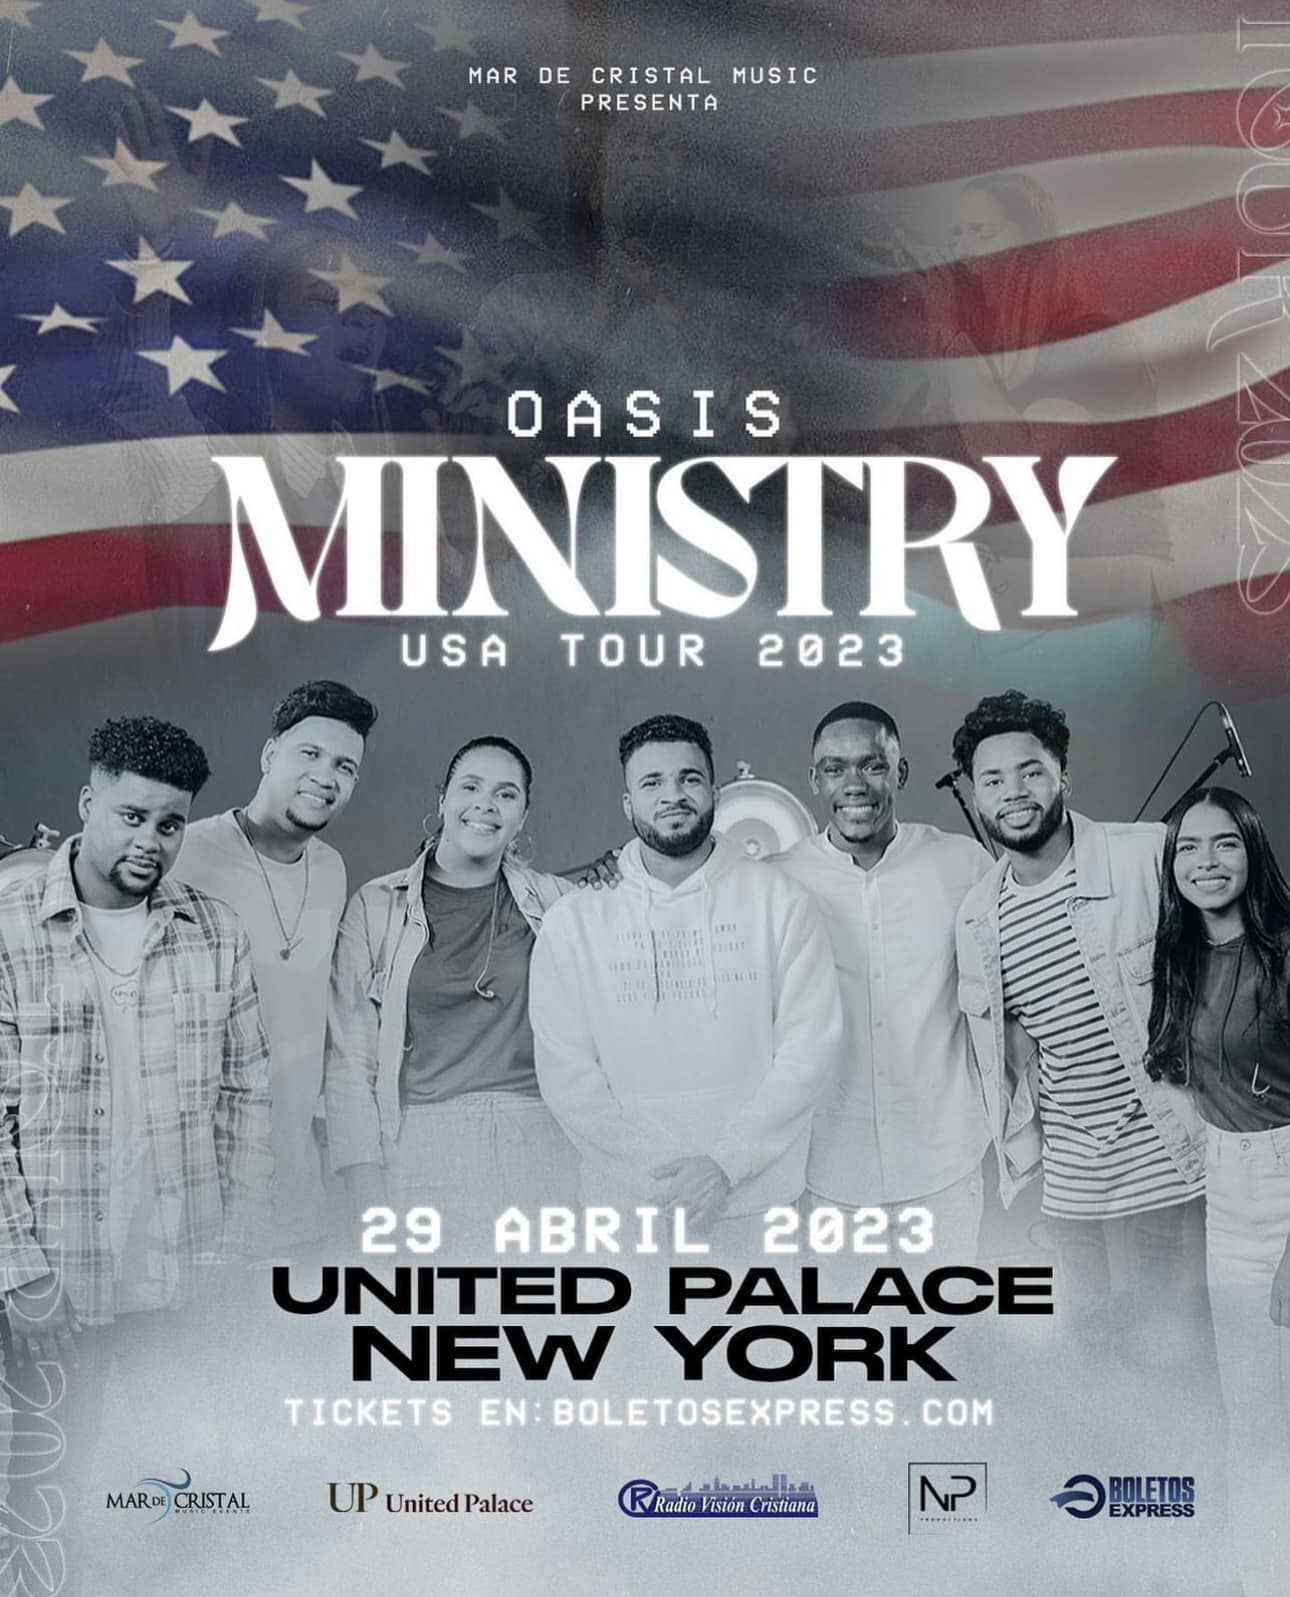 OASIS MINISTRY Tickets United Palace